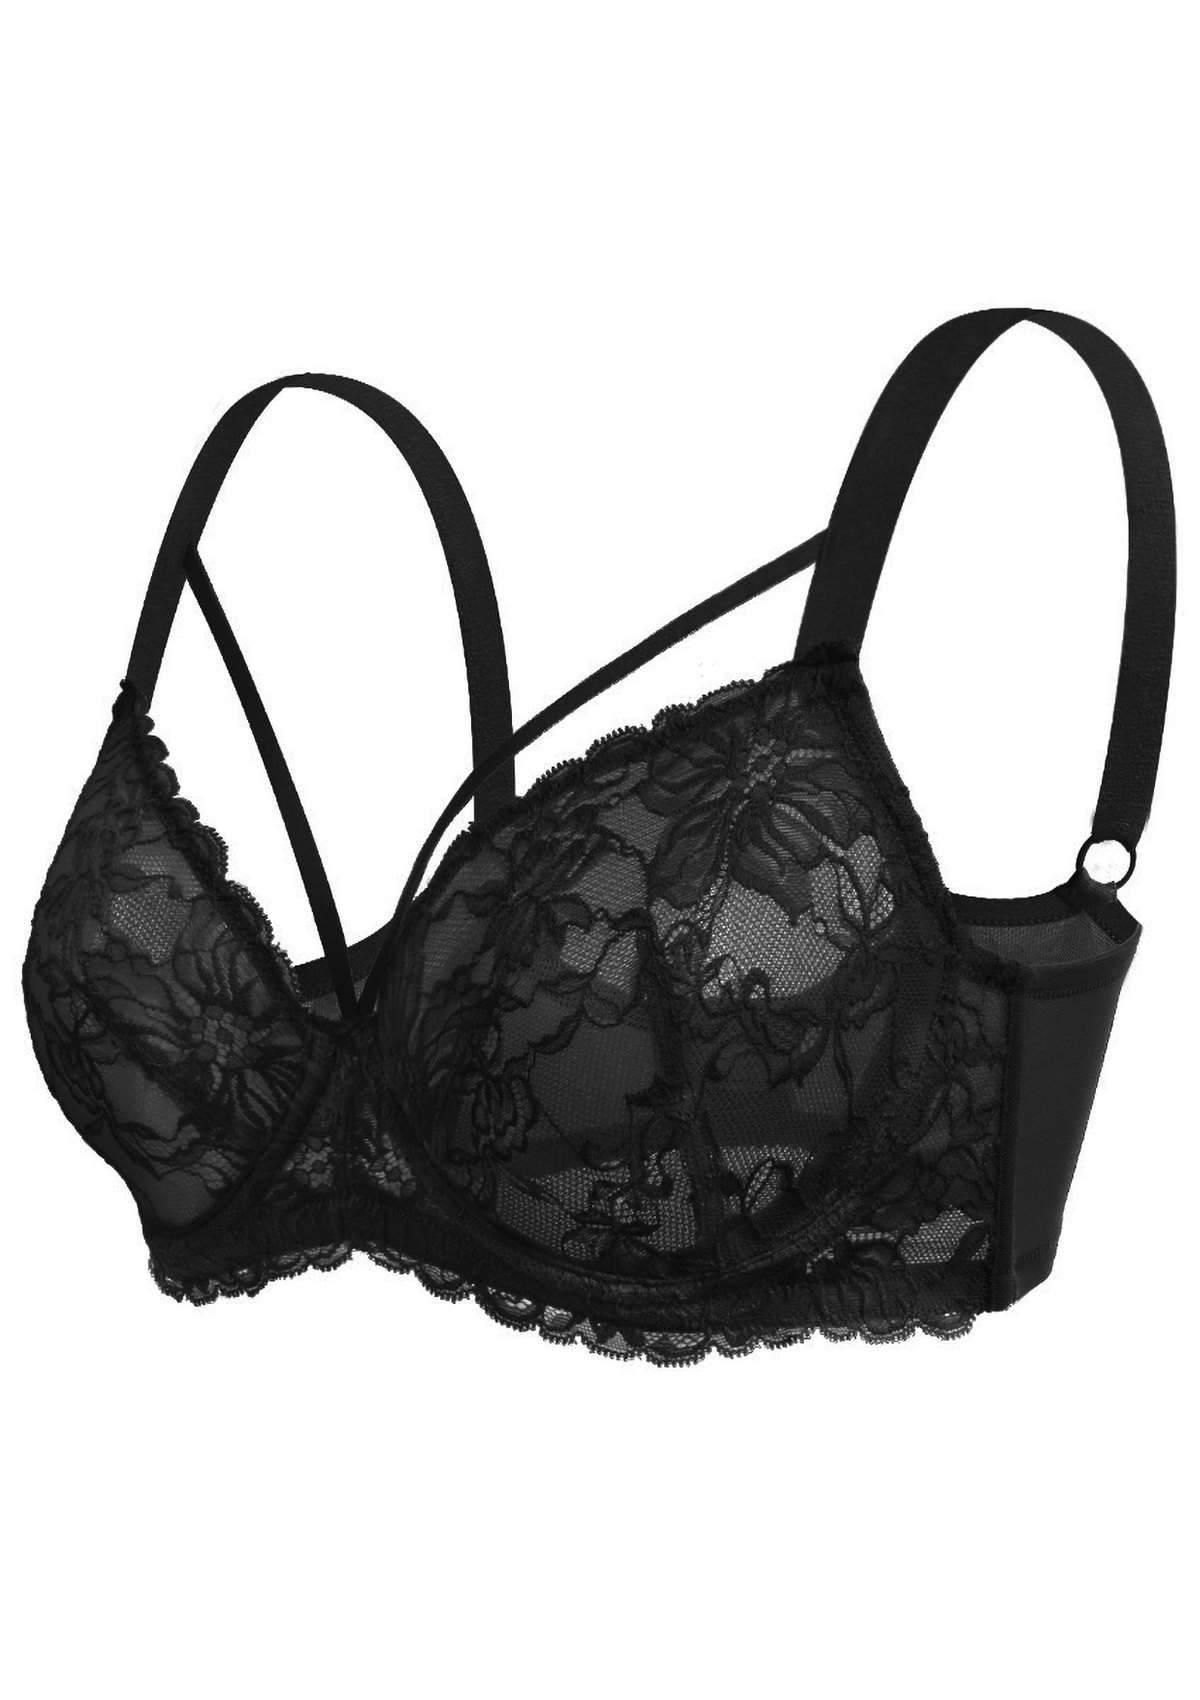 HSIA Pretty In Petals Bra - Plus Size Lingerie For Comfrot And Support - Black / 46 / G